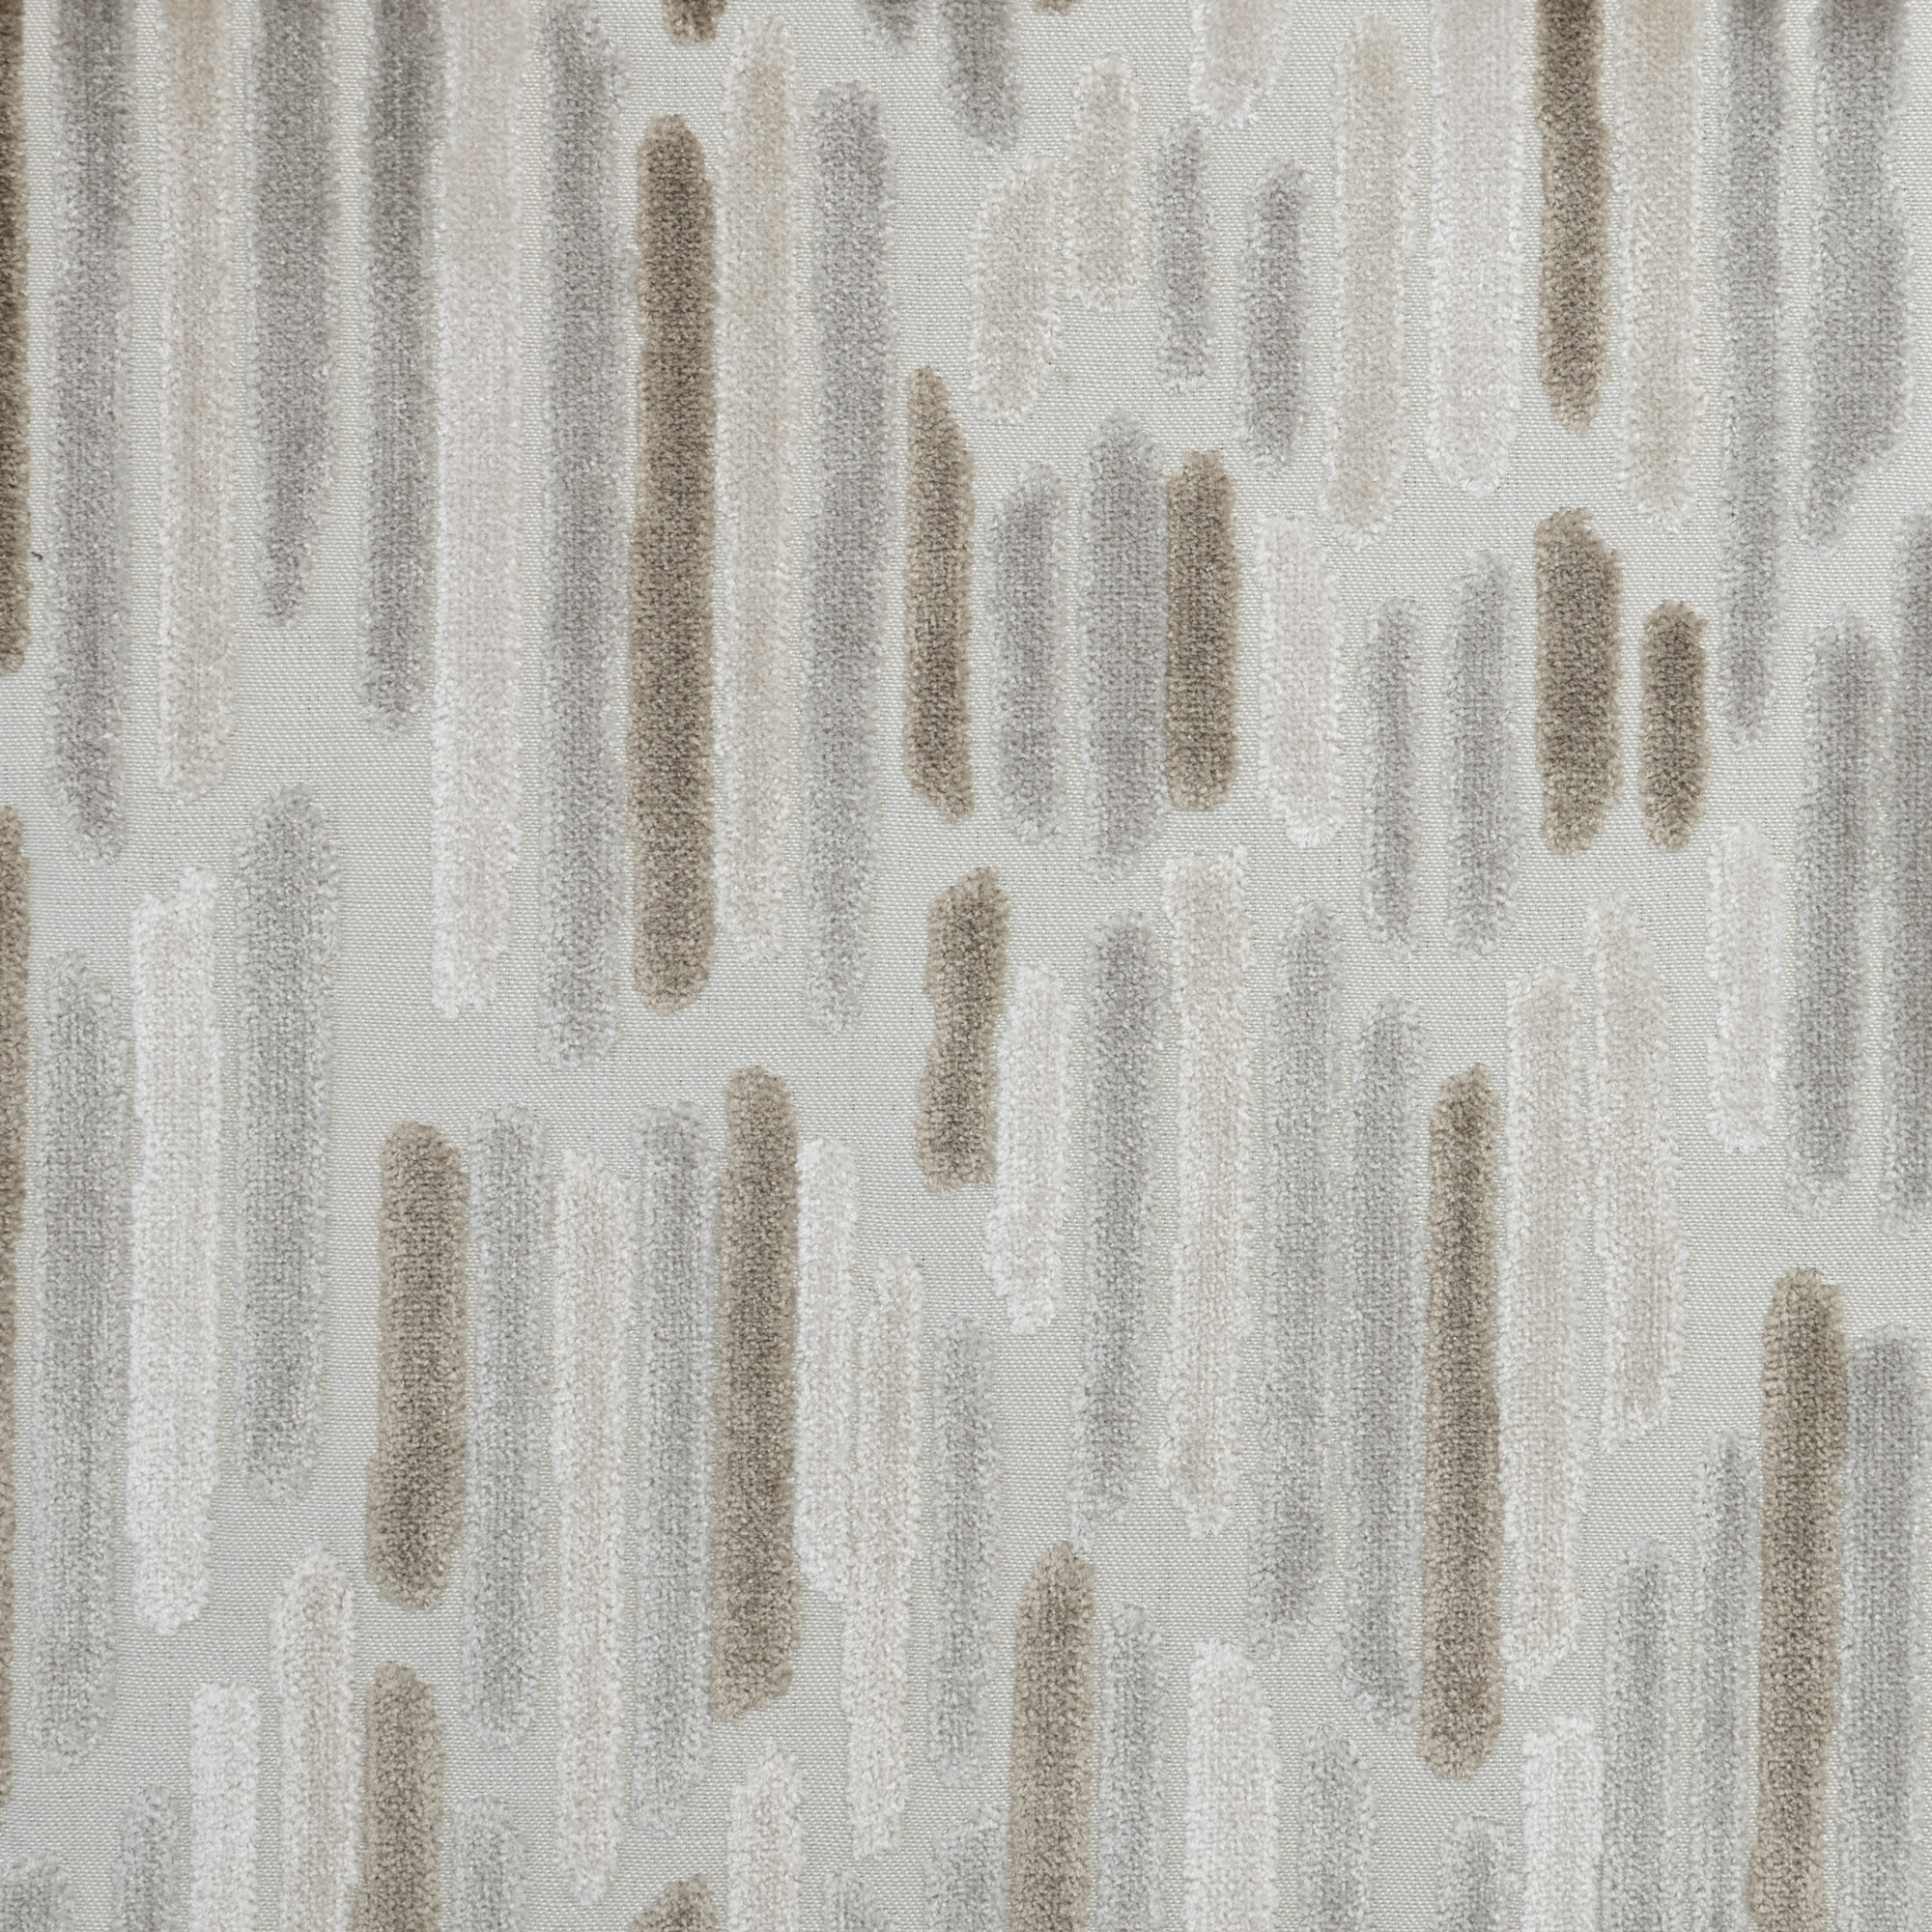 Beige And Off White Two Toned Striped Upholstery Fabric By The Yard